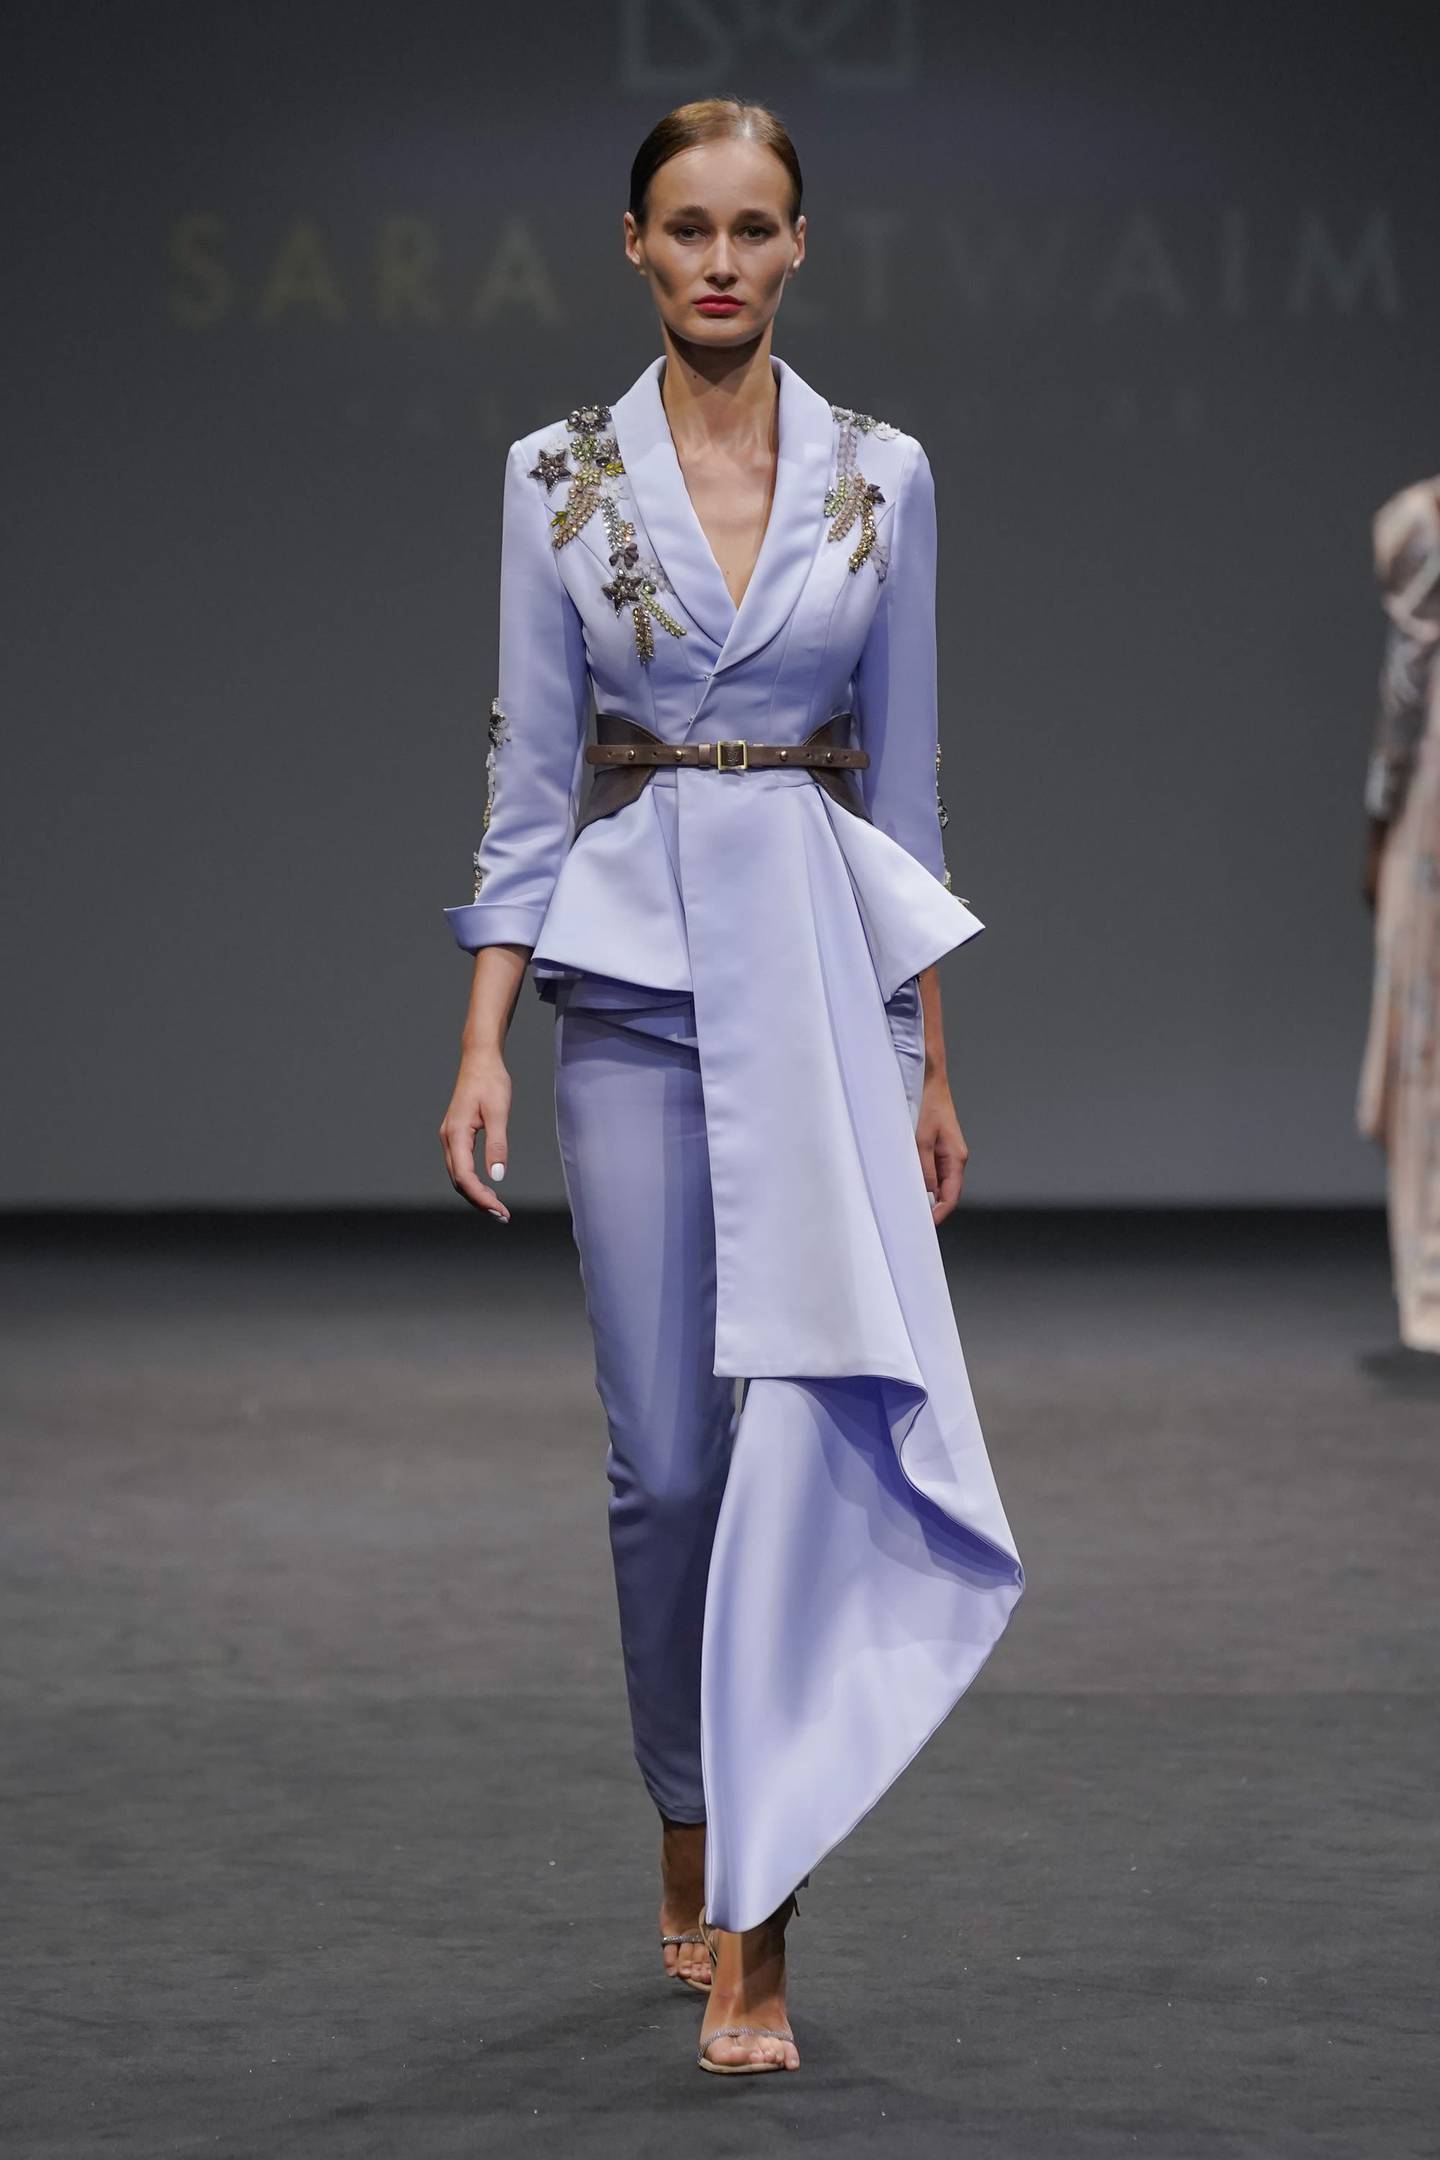 Sara Altwaim covered looks with embroidery at AFW. Photo: AFW